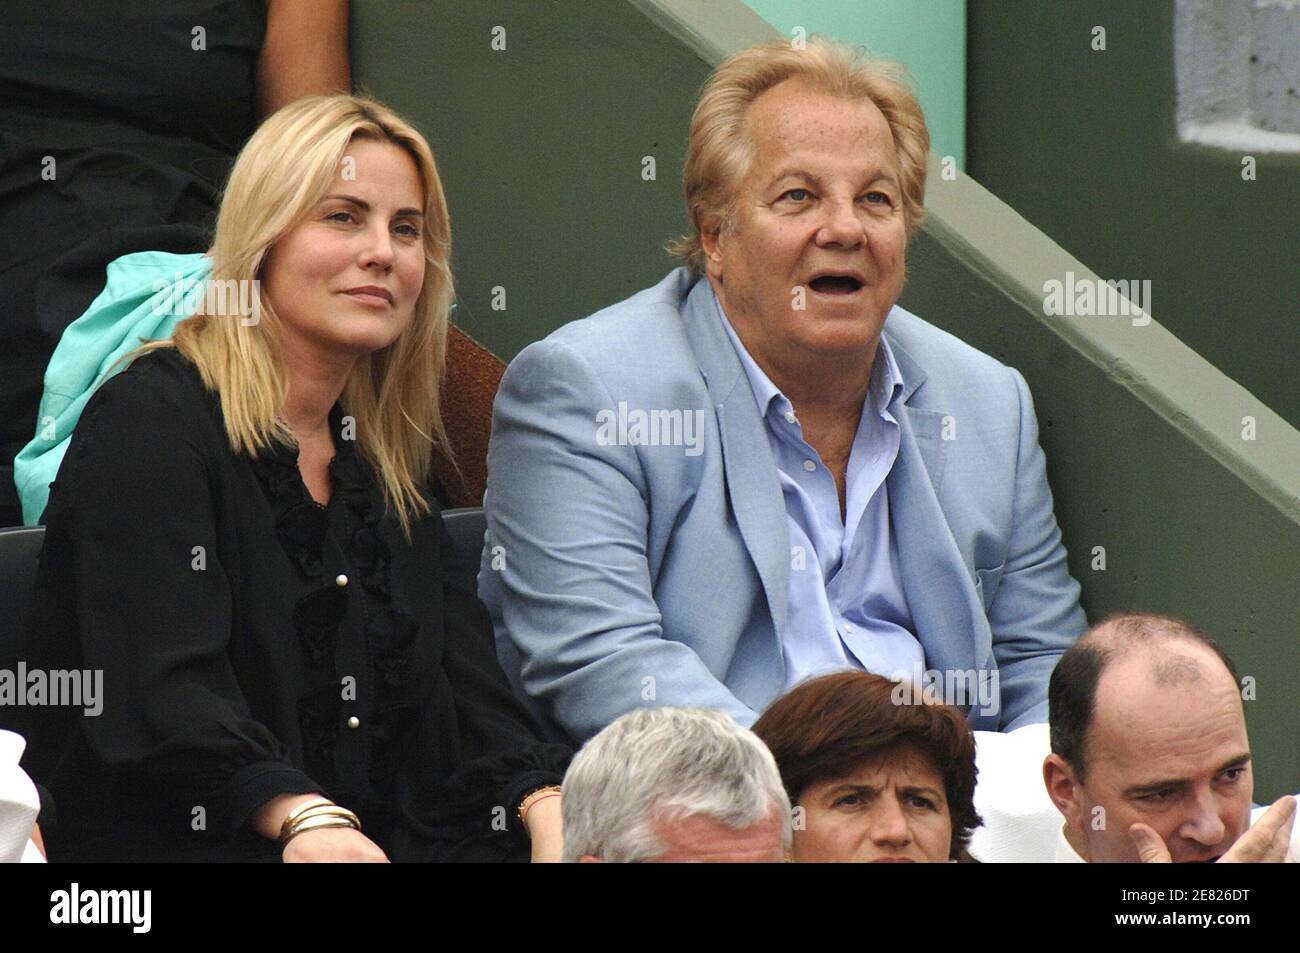 Sophie Favier and Massimo Gargia attend the 4th Round of the Tennis French Open at Roland Garros arena, in Paris, France on June 3, 2007. Photo by ABACAPRESS.COM Stock Photo